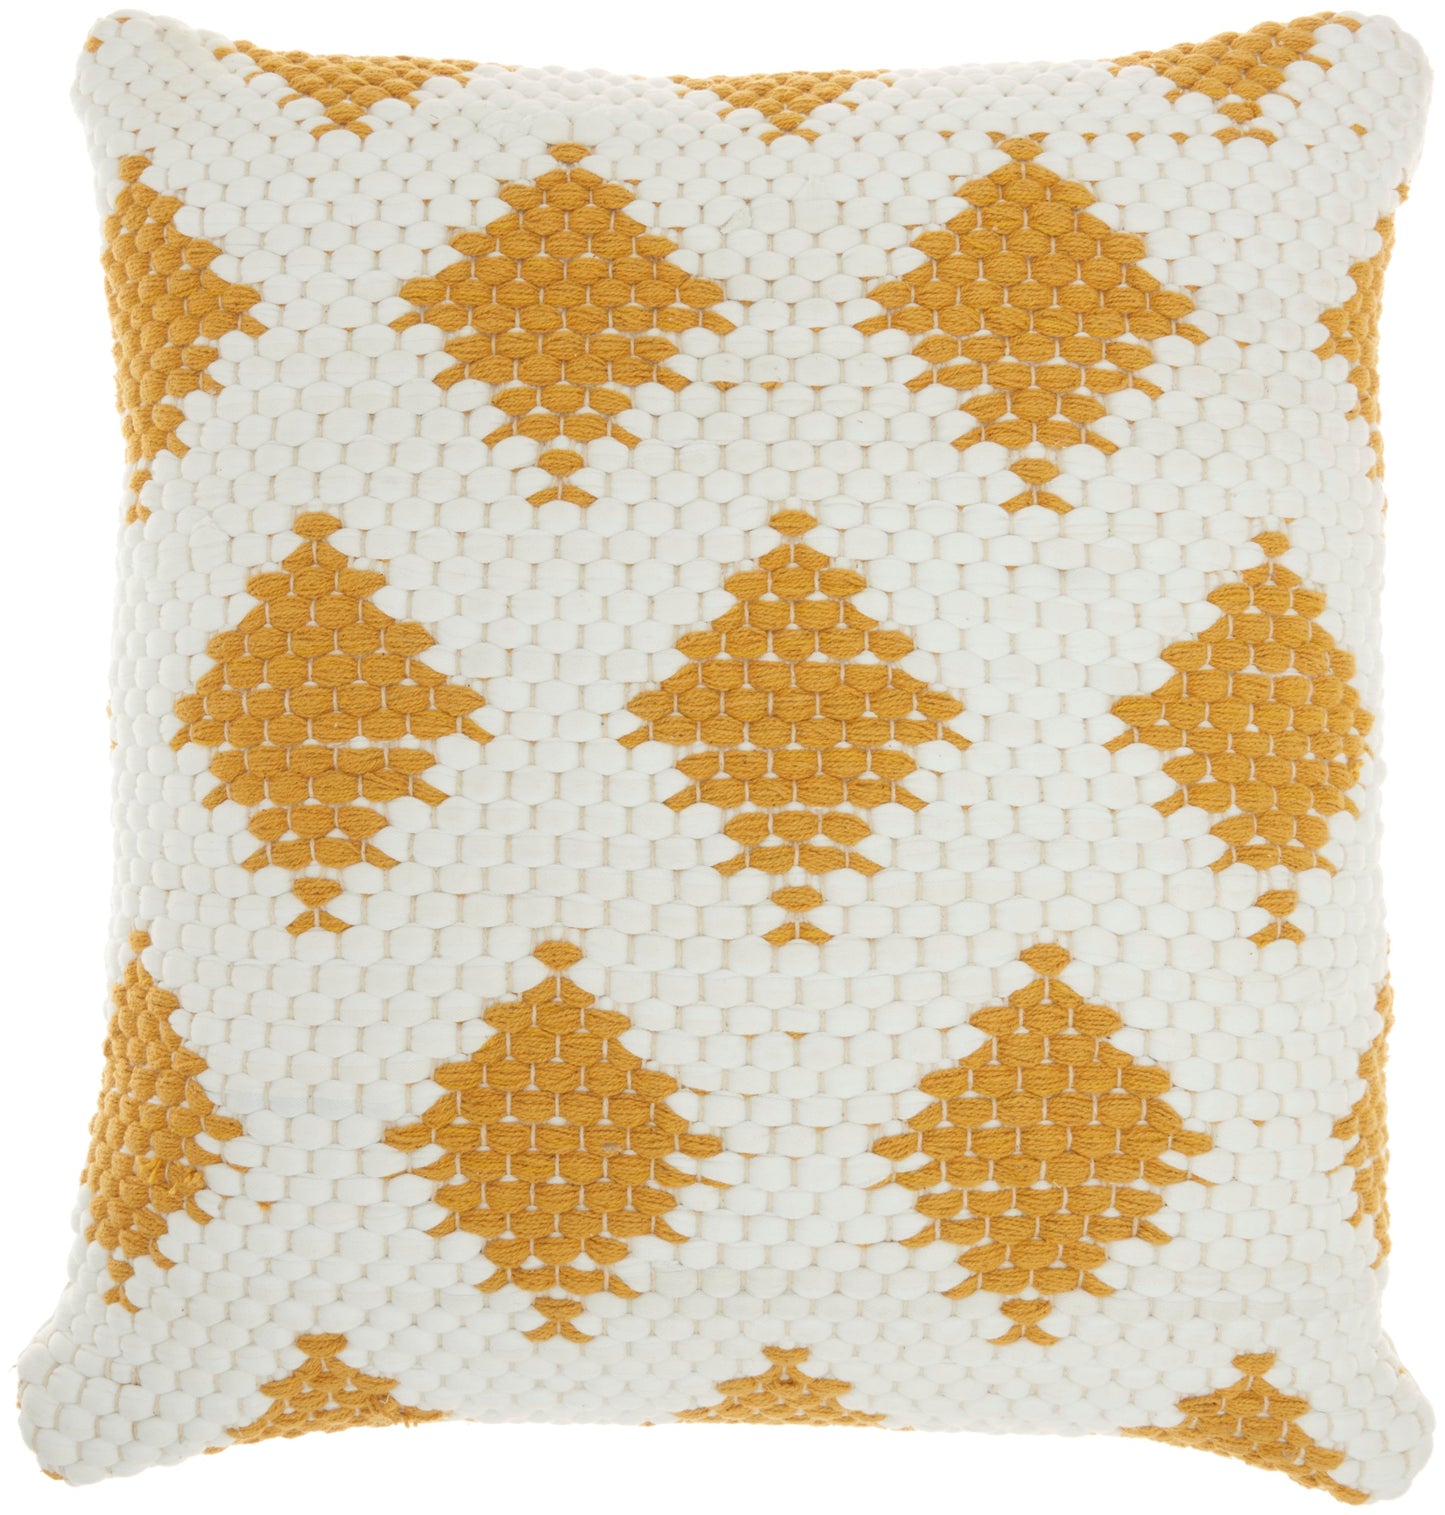 Life Styles DL881 Cotton Woven Diamonds Throw Pillow From Mina Victory By Nourison Rugs